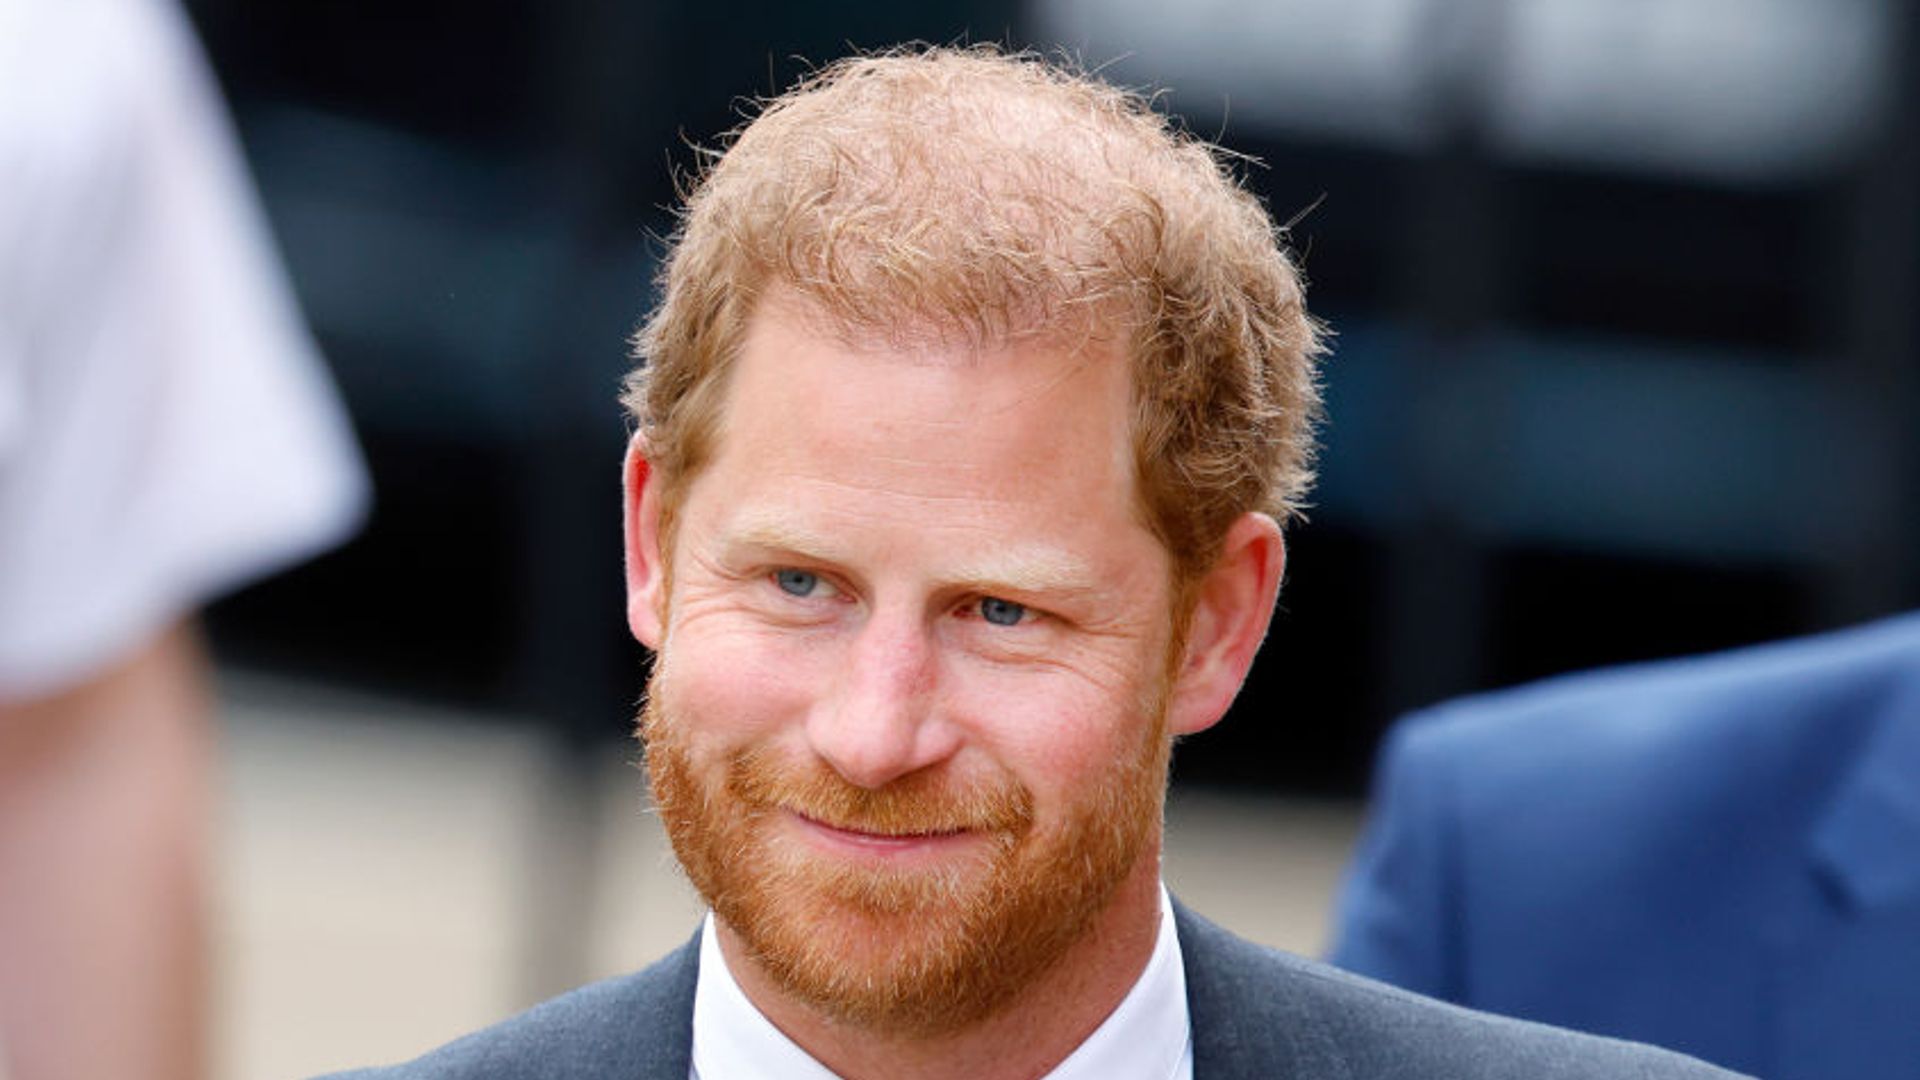 Prince Harry arrives at the Royal Courts of Justice on March 30, 2023 in London, England